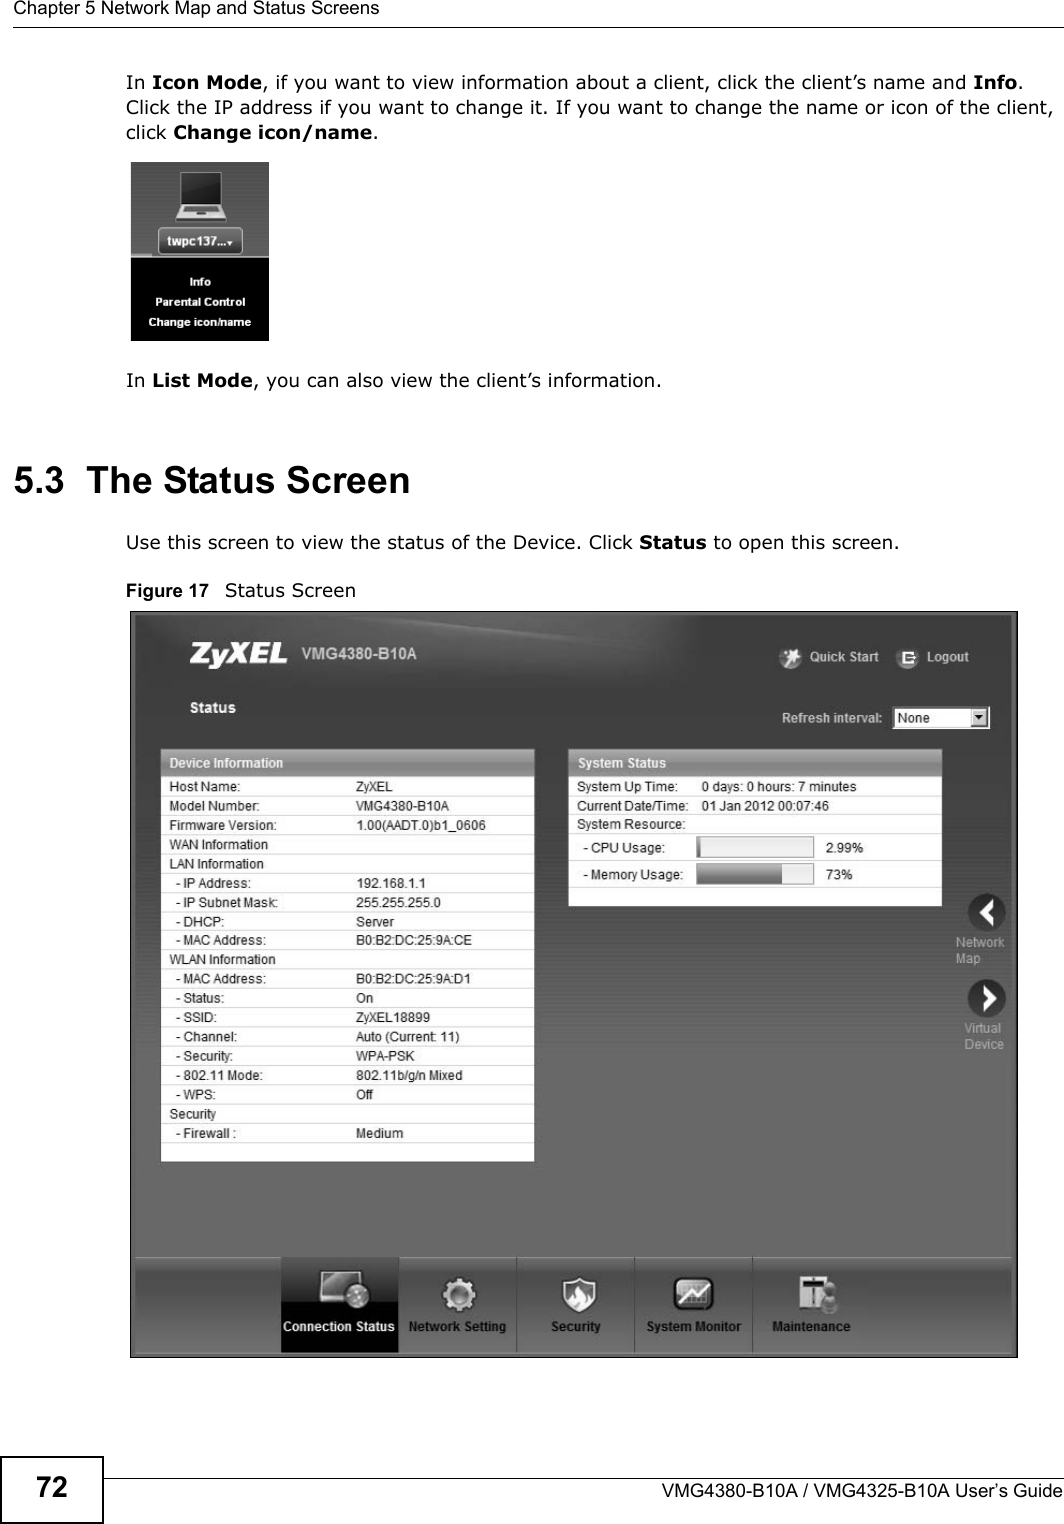 Chapter 5 Network Map and Status ScreensVMG4380-B10A / VMG4325-B10A User’s Guide72In Icon Mode, if you want to view information about a client, click the client’s name and Info. Click the IP address if you want to change it. If you want to change the name or icon of the client, click Change icon/name. In List Mode, you can also view the client’s information.5.3  The Status Screen Use this screen to view the status of the Device. Click Status to open this screen.Figure 17   Status Screen